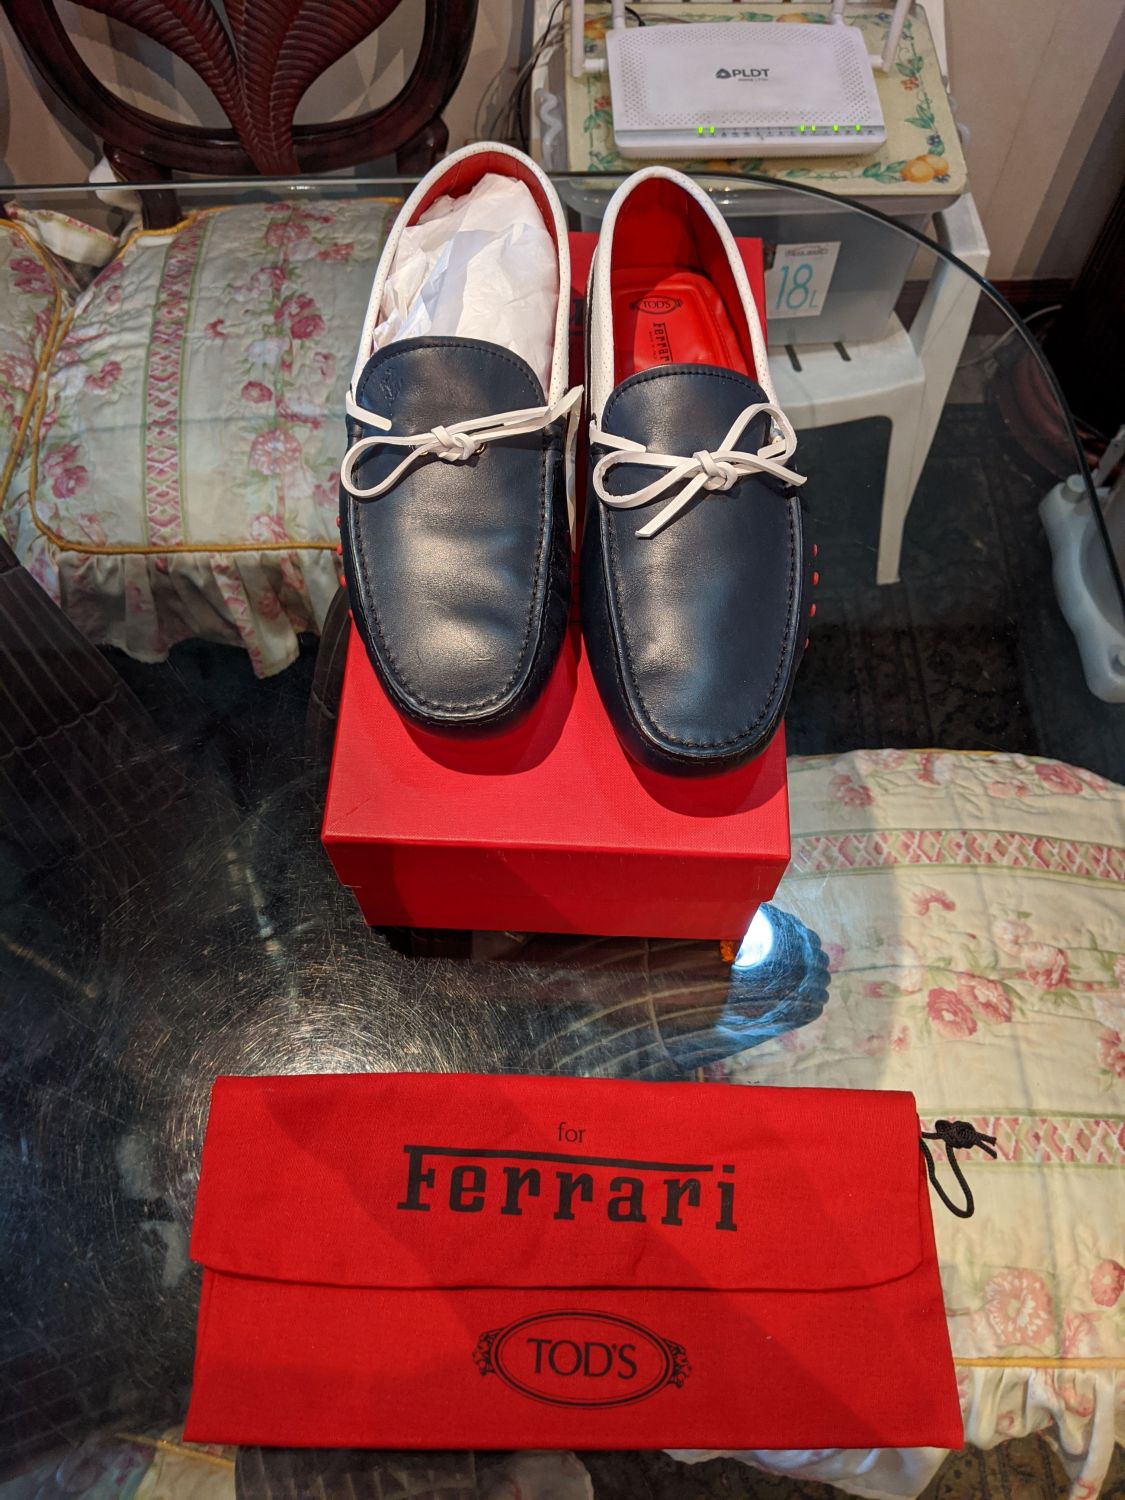 Tods X Ferrari Loafers | AfterMarket